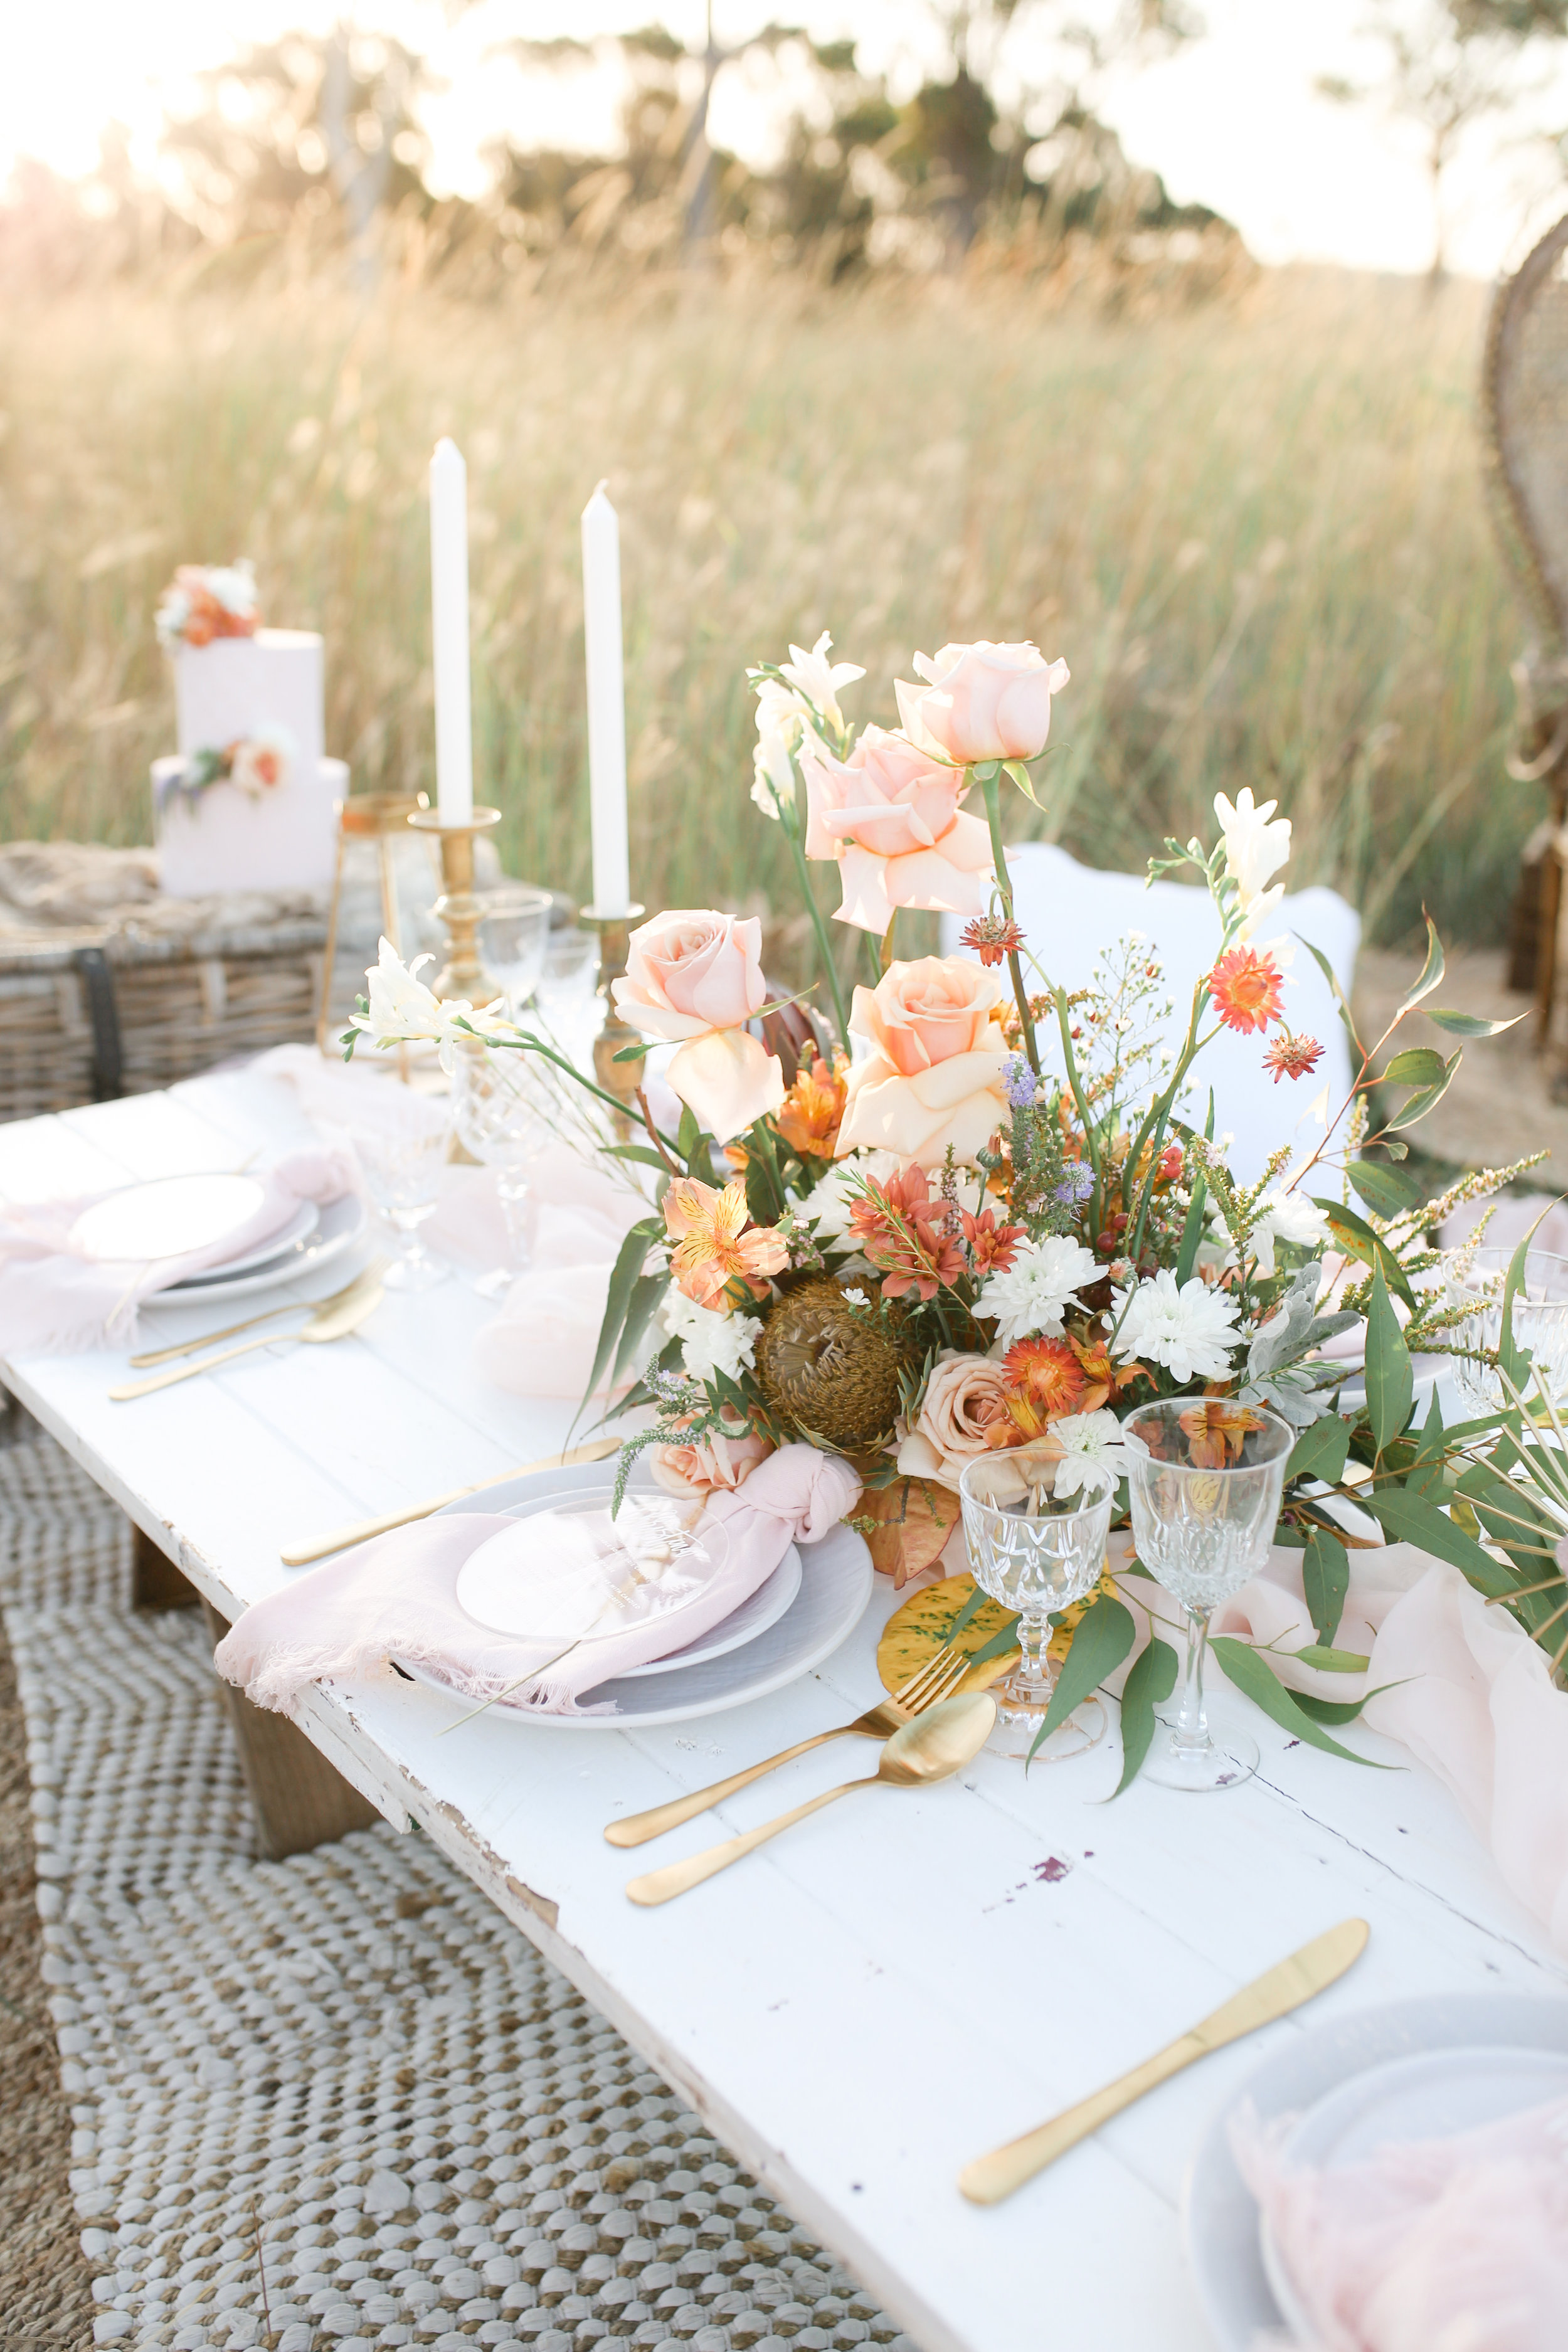 Styled event table setting